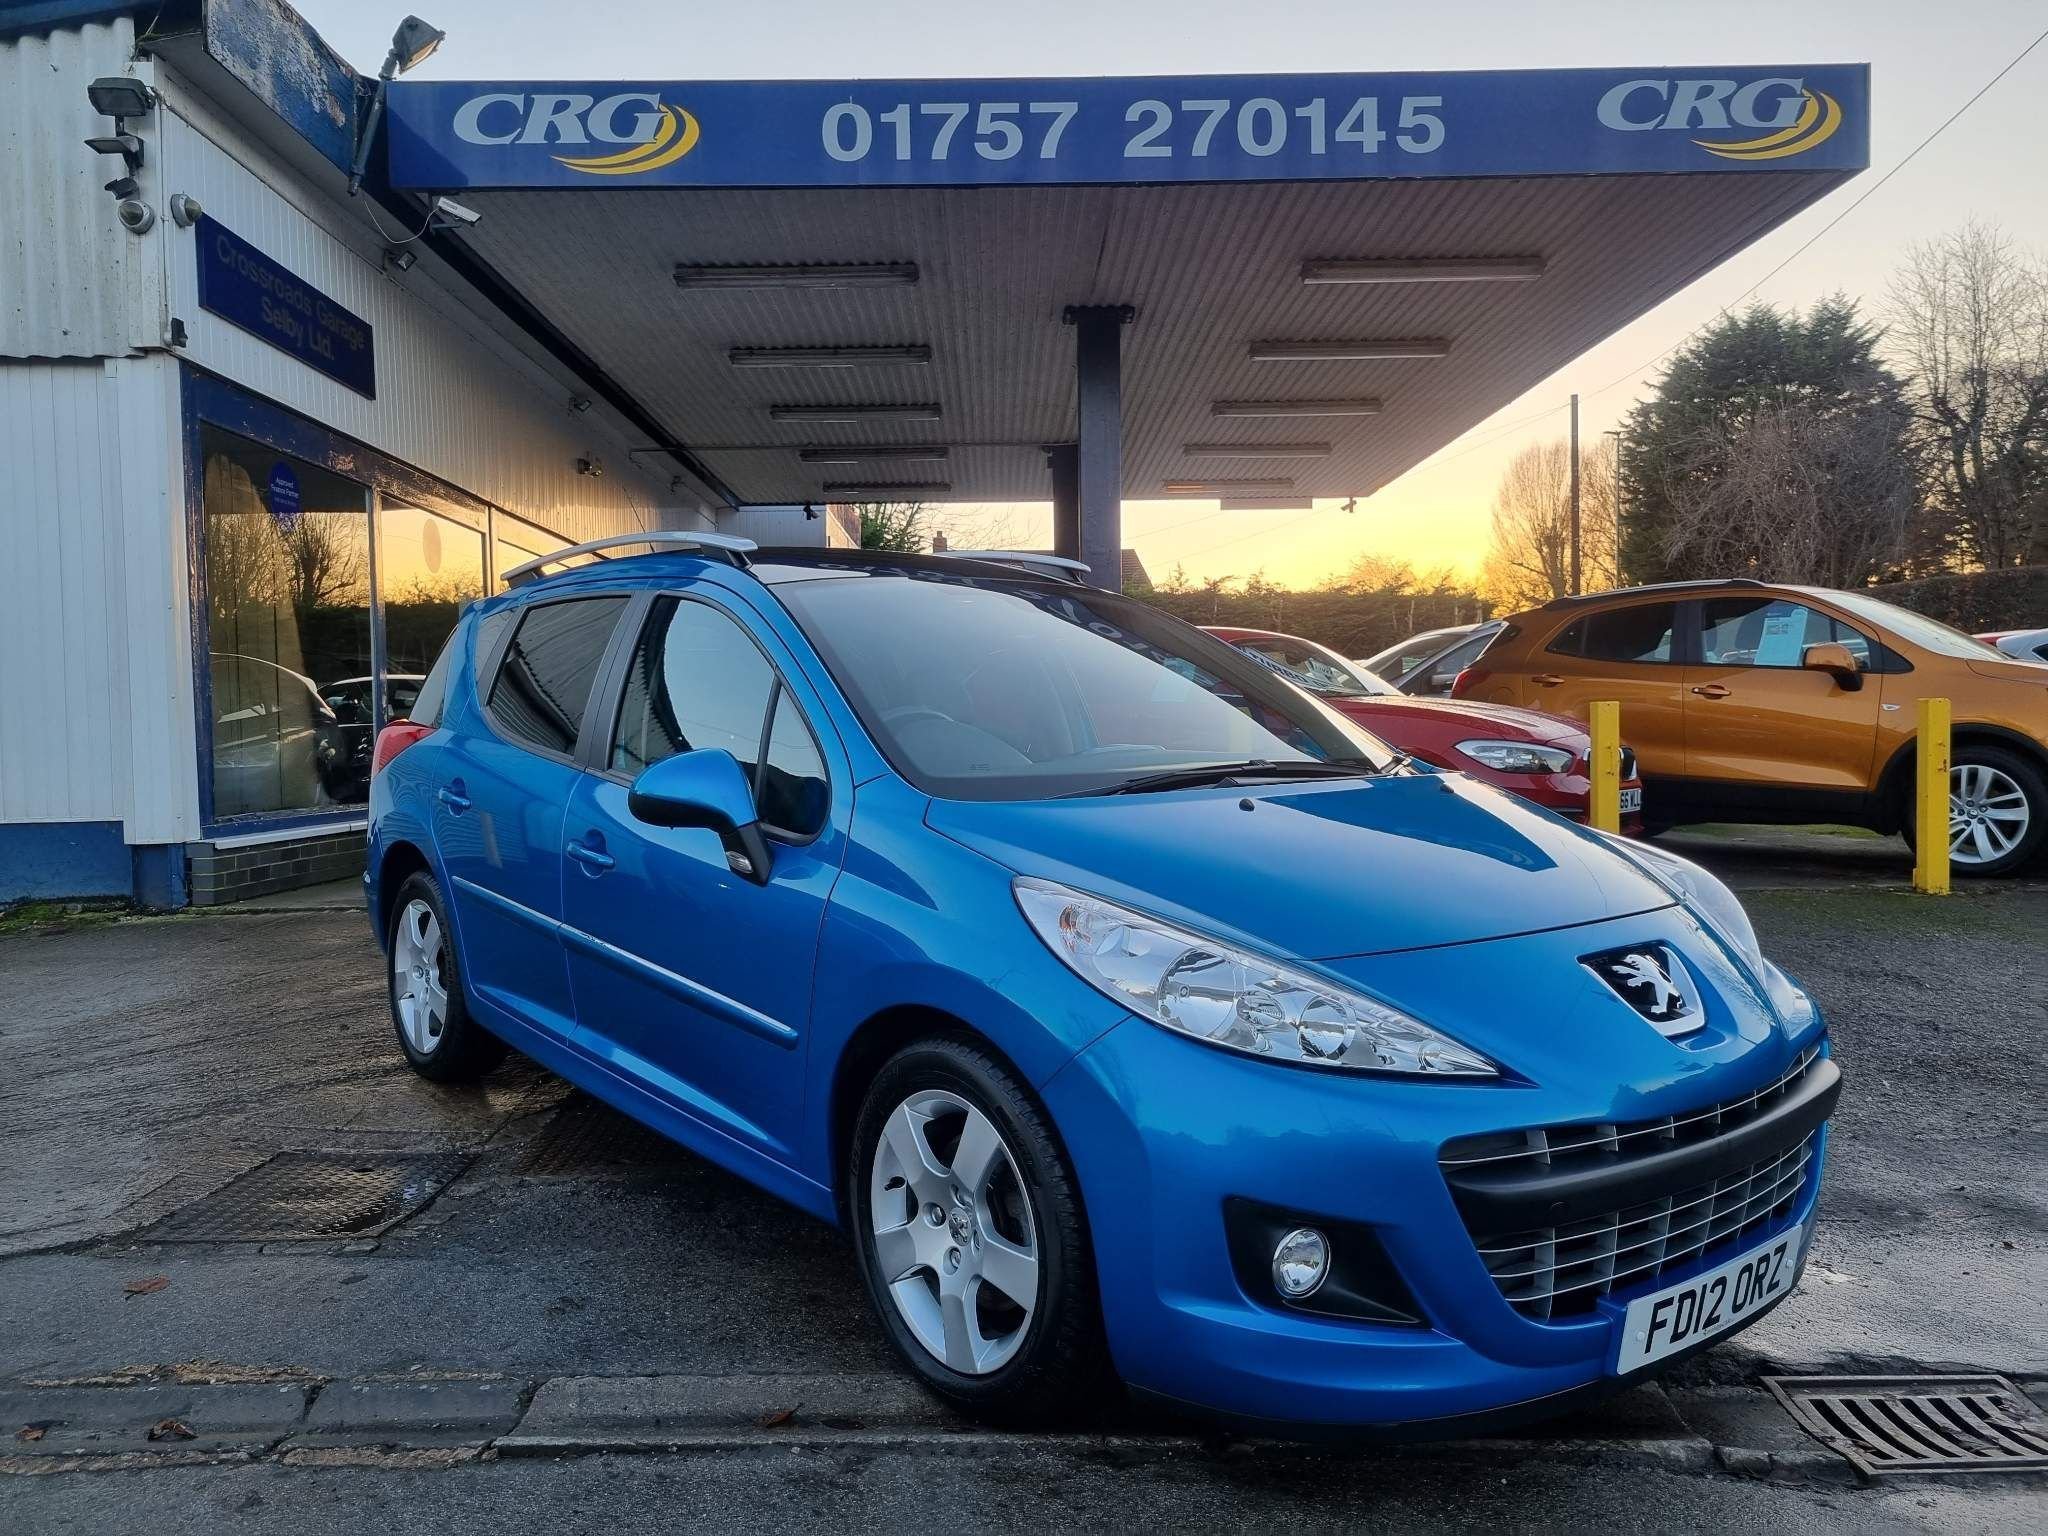 Used Peugeot 207 sw 1.6 HDi Allure Euro 5 5dr 2012 5dr Manual